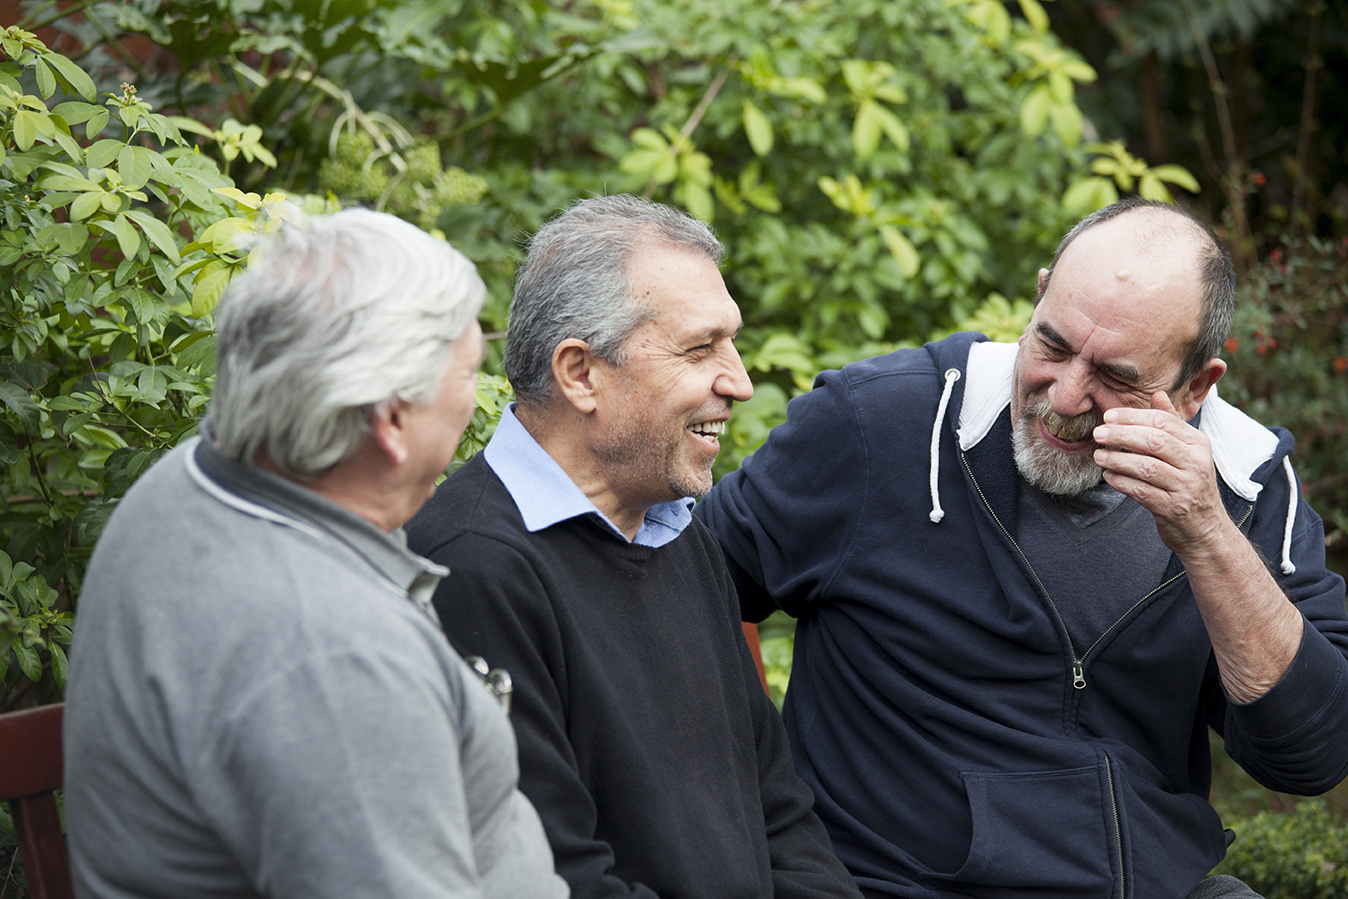 Male carers enjoying making new connections during their National Garden Scheme visit